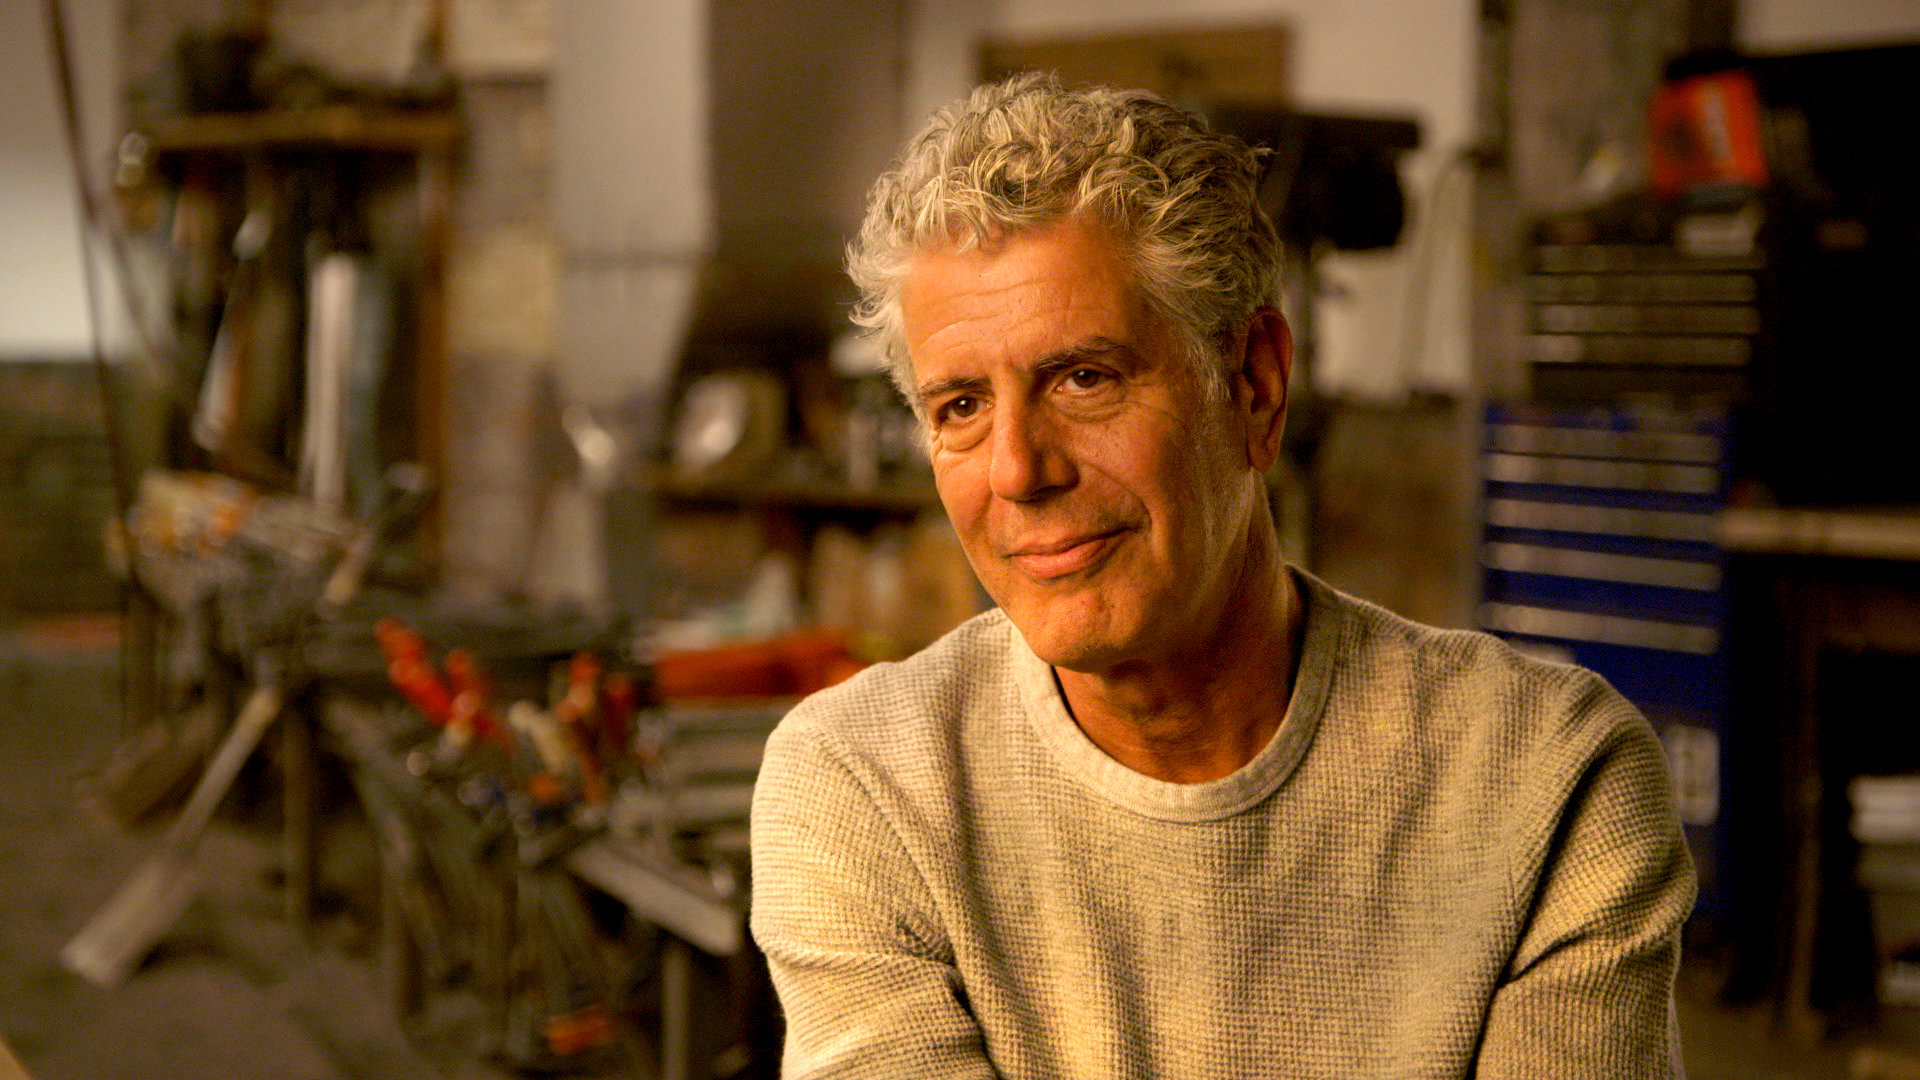 Anthony Bourdain is coming to town.